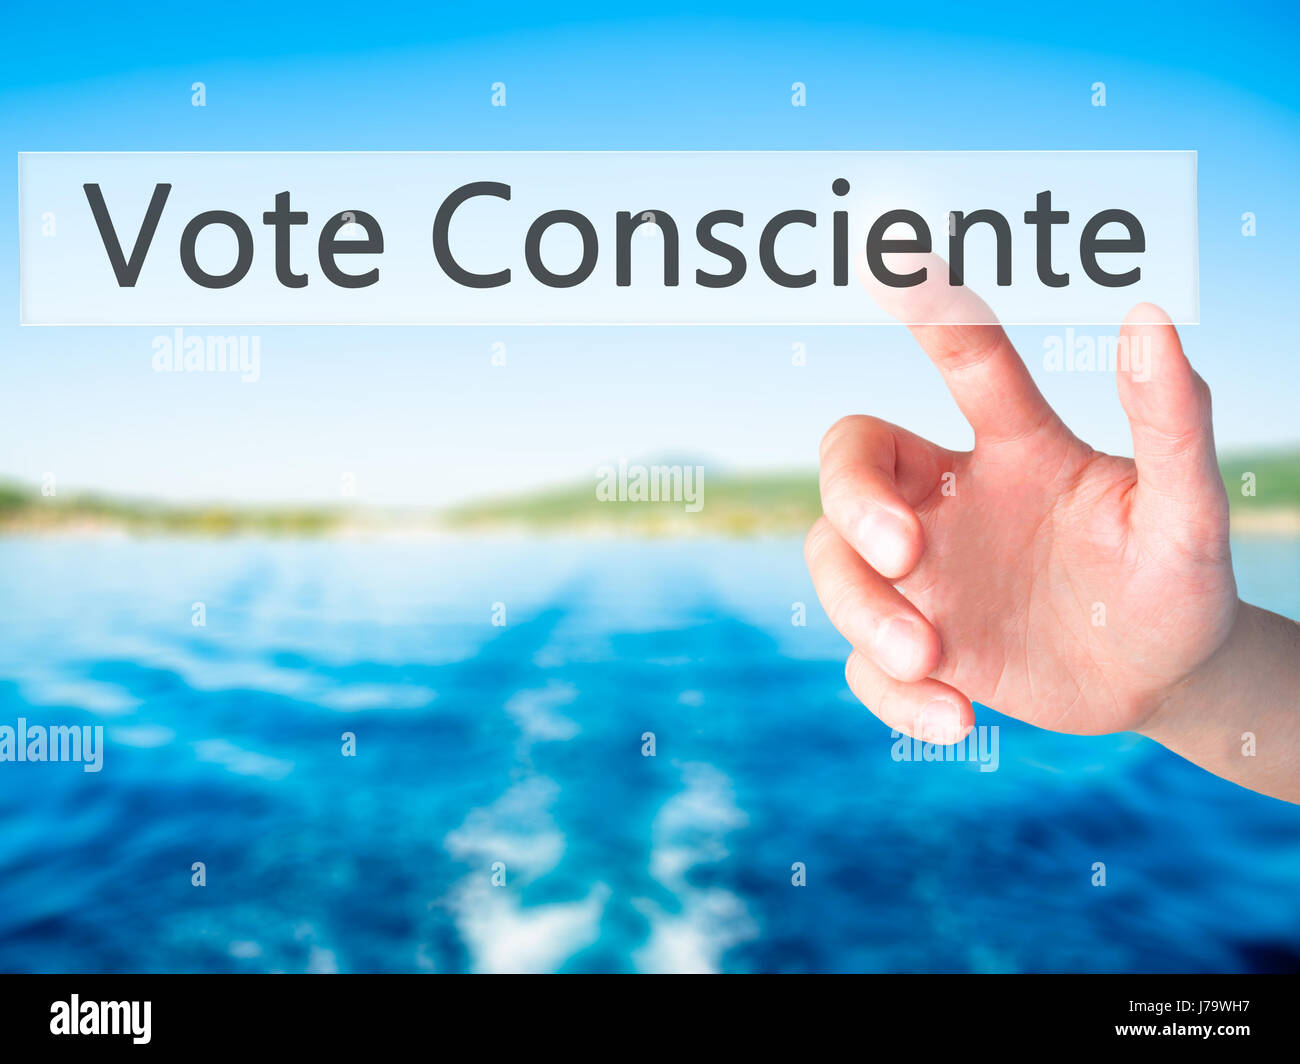 Vote Consciente - Hand pressing a button on blurred background concept . Business, technology, internet concept. Stock Photo Stock Photo